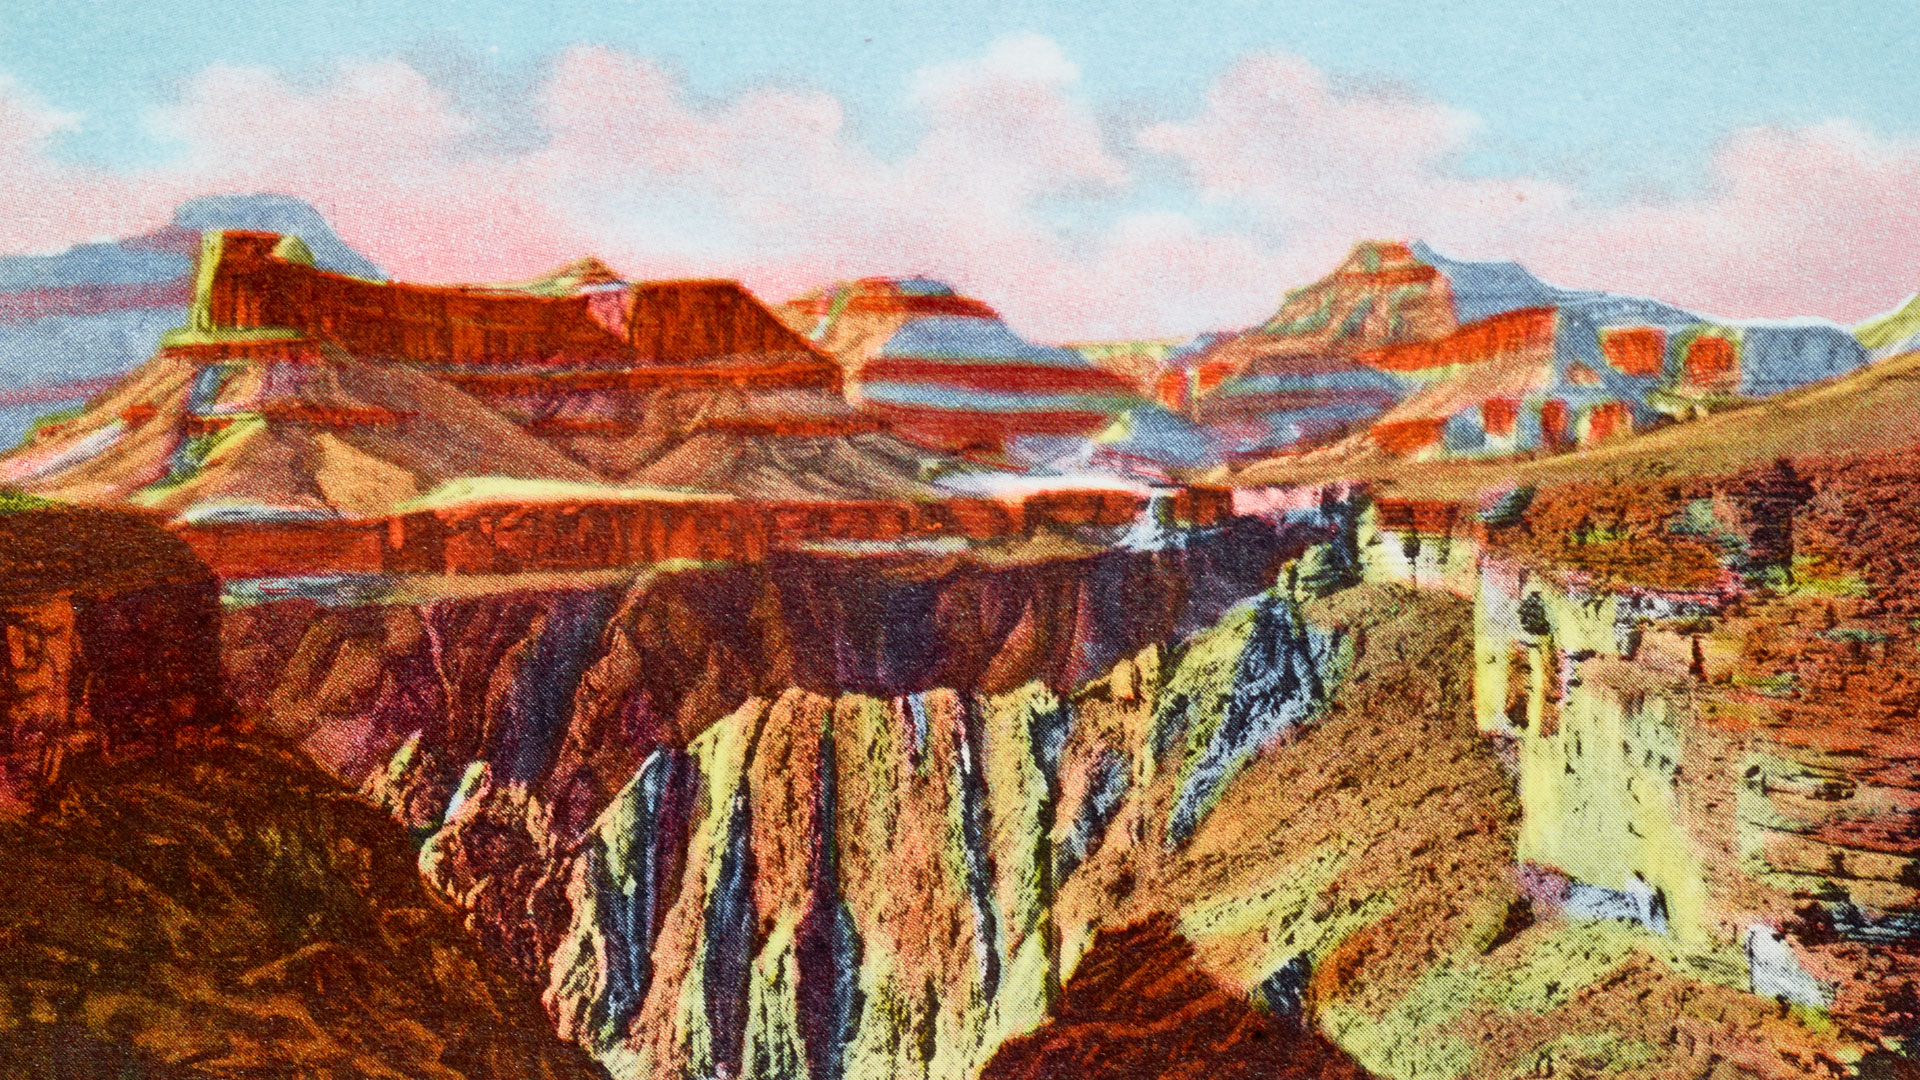 Postcard illustration of the Grand Canyon